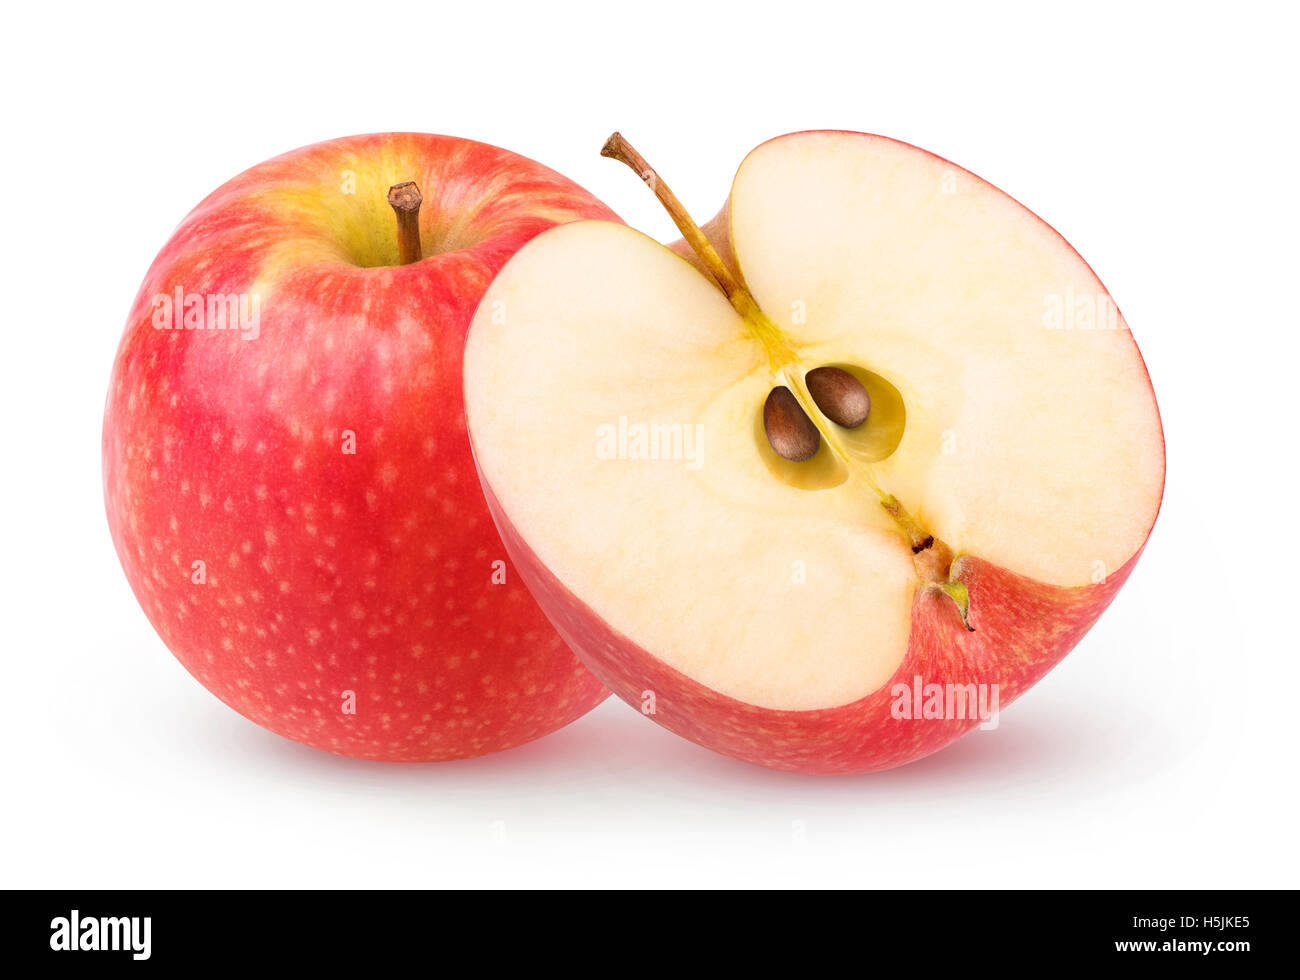 Isolated apples. One red apple fruit and a half isolated on white background with clipping path Stock Photo